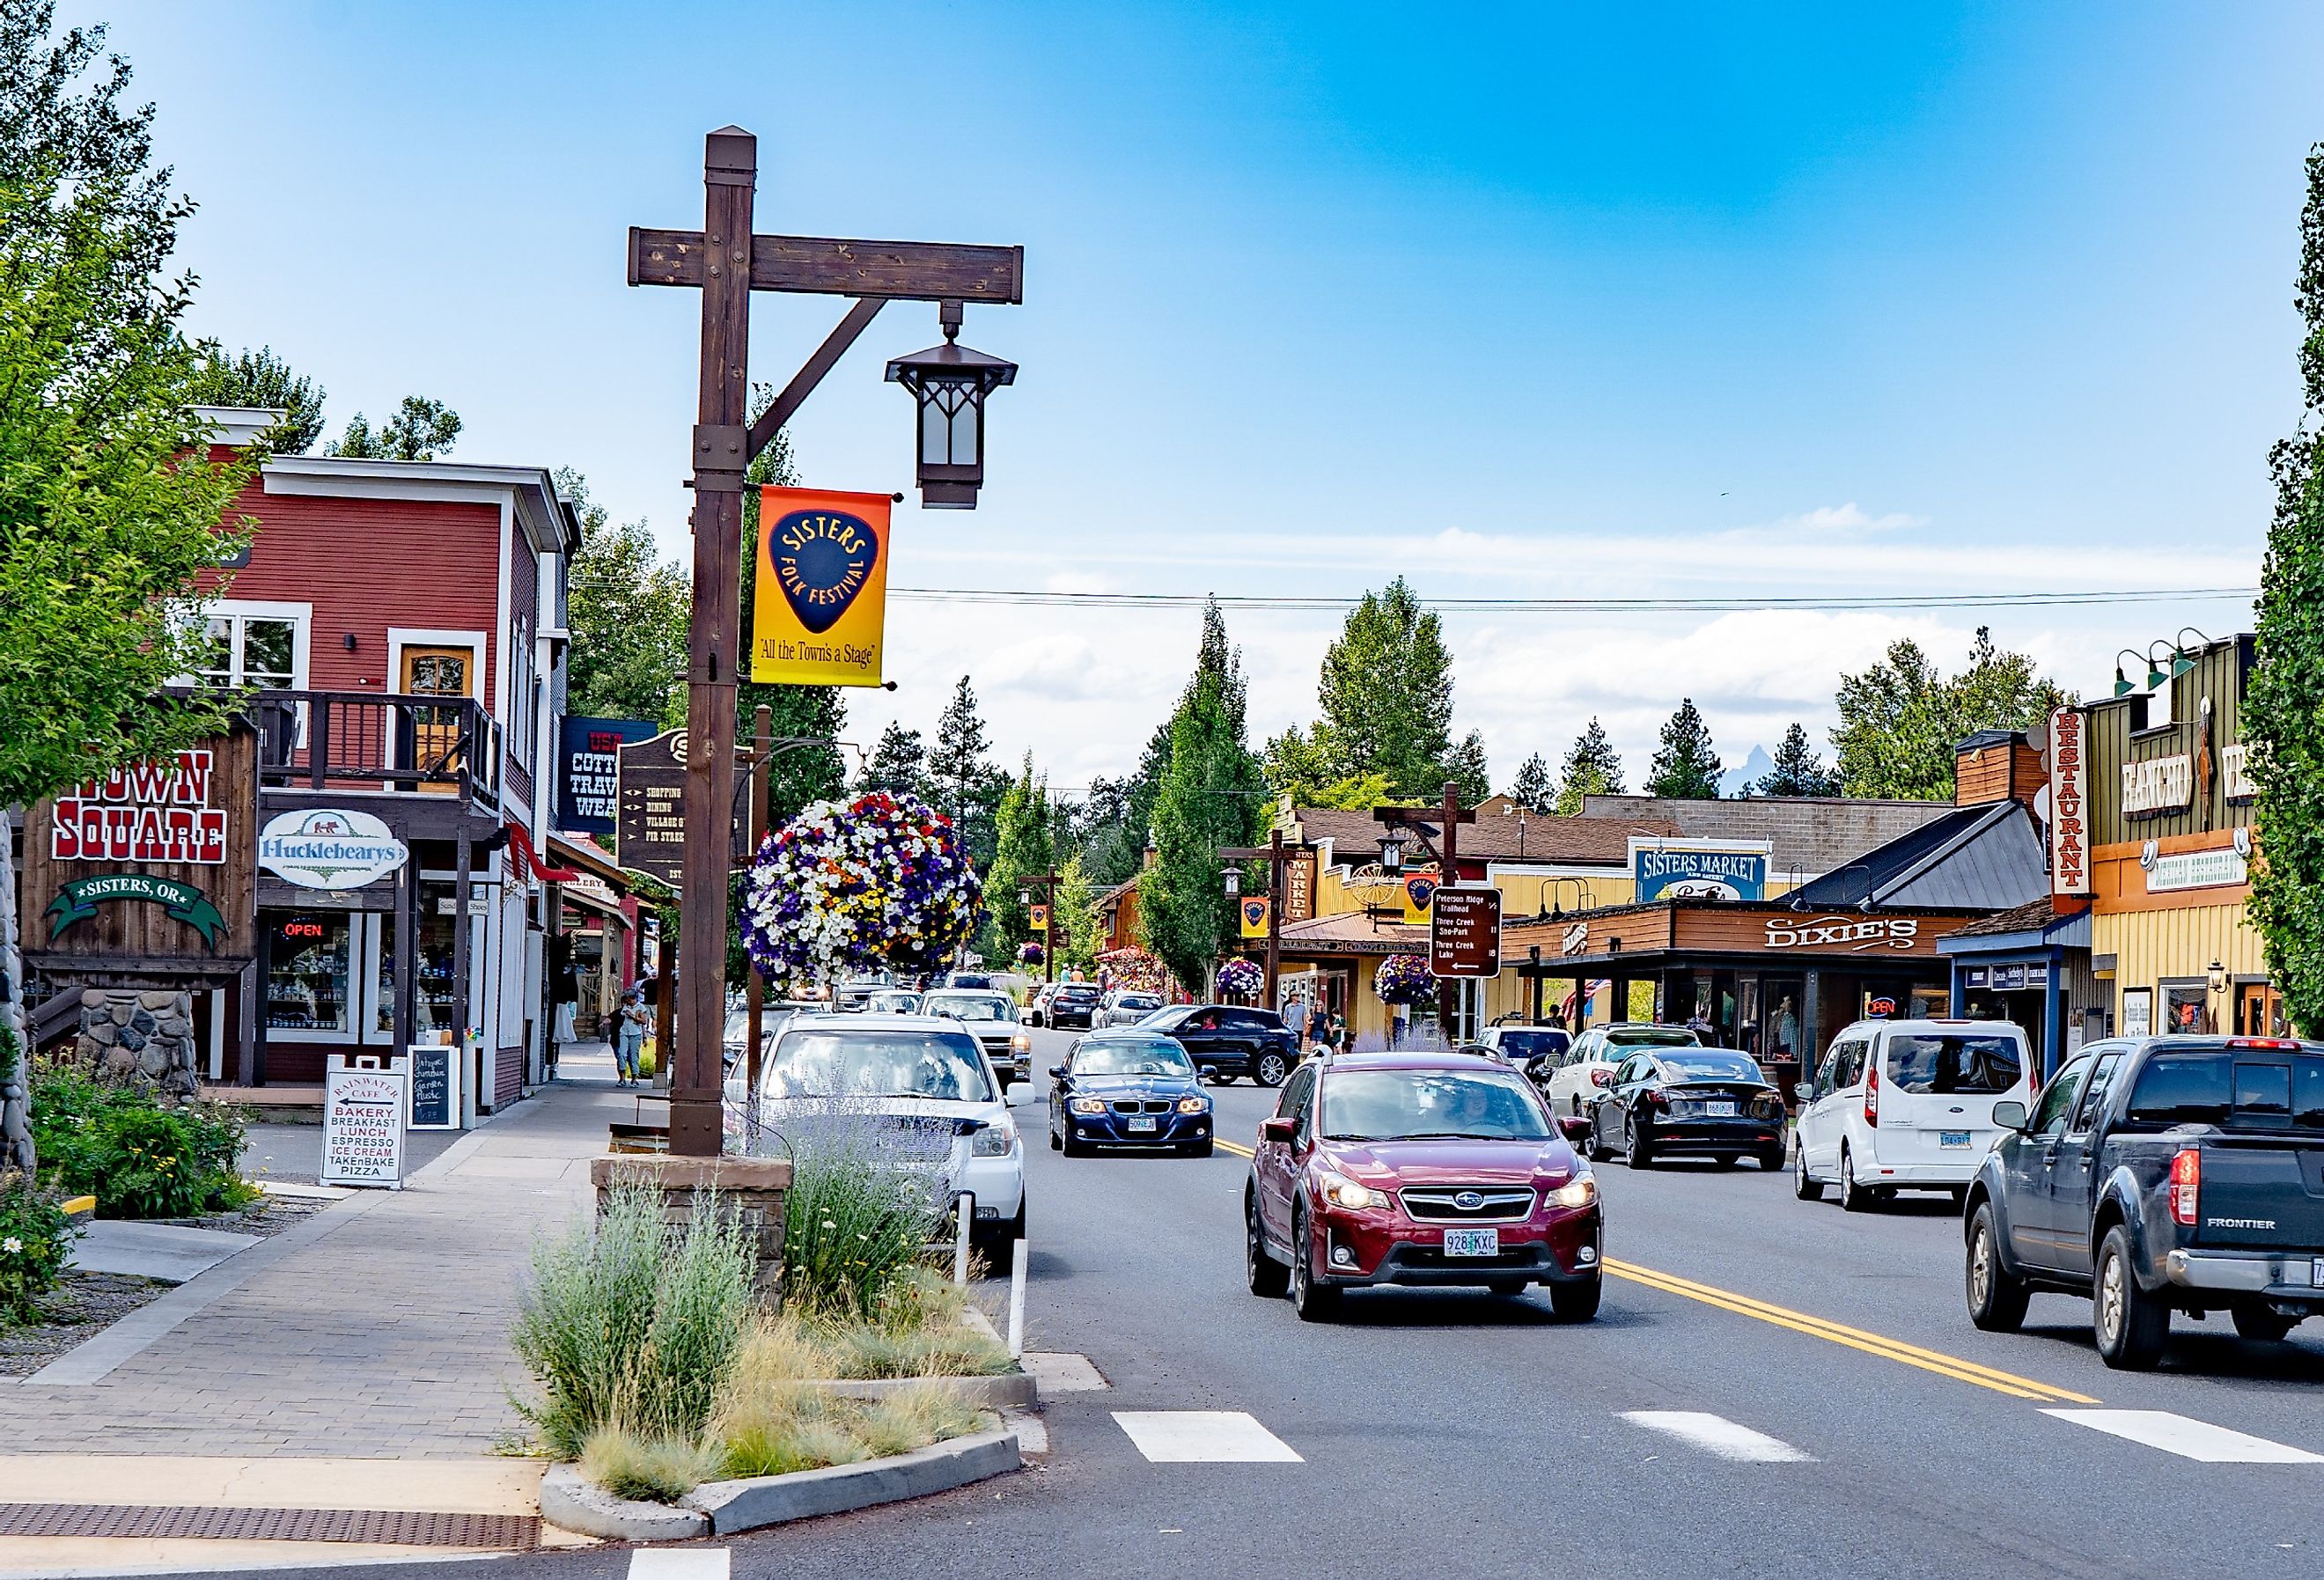 Looking down the main street in downtown, Sisters, Oregon in summer. Image credit Bob Pool via Shutterstock